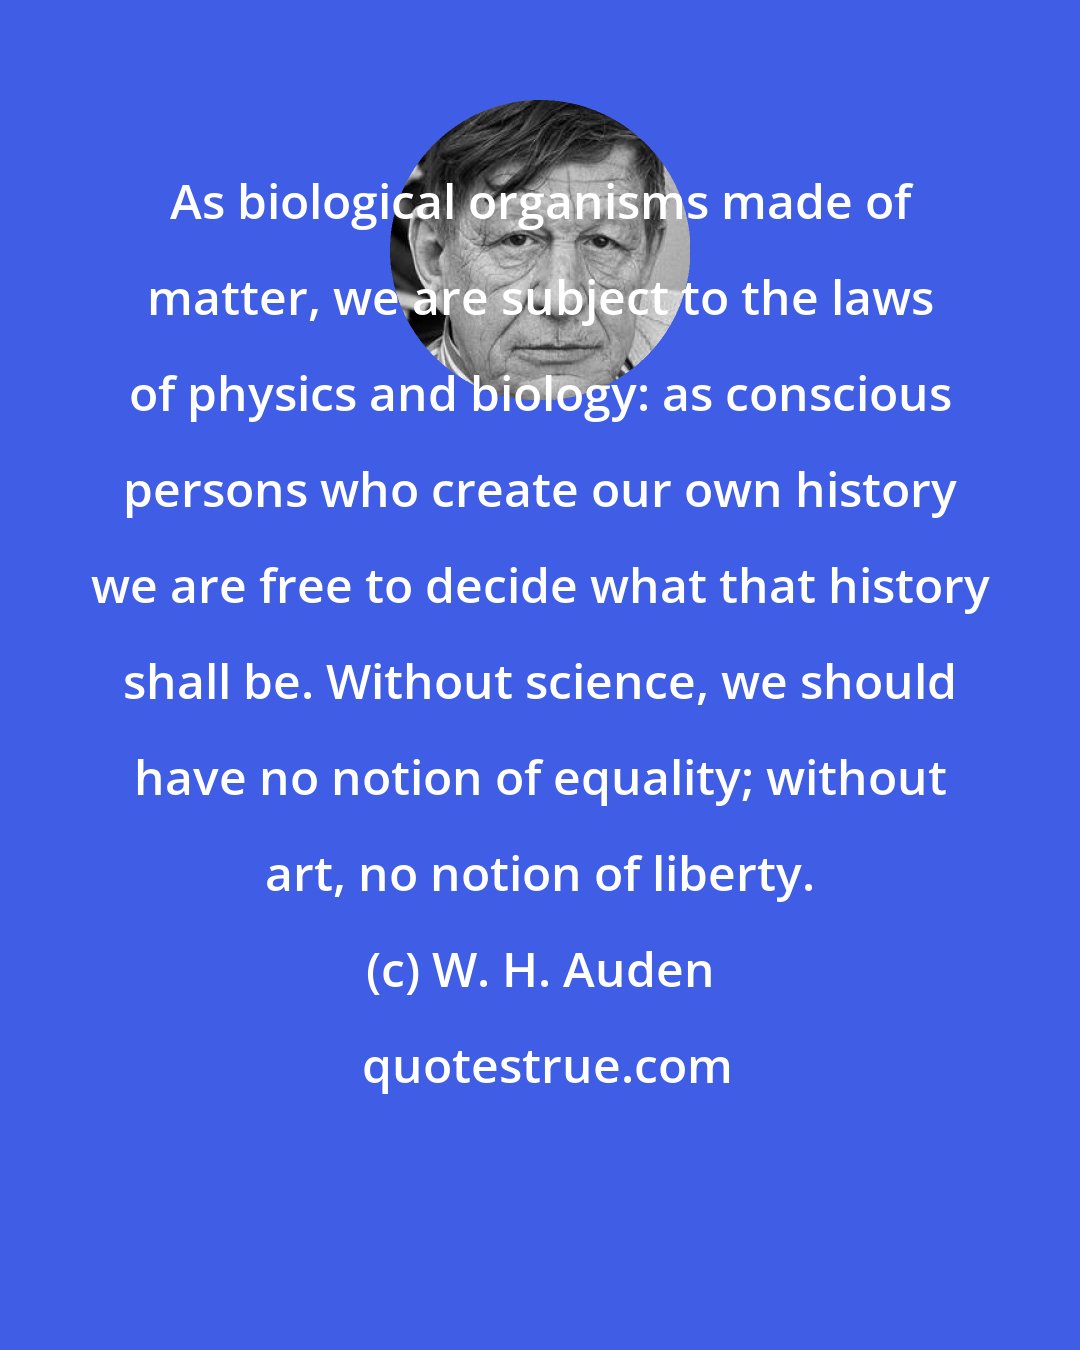 W. H. Auden: As biological organisms made of matter, we are subject to the laws of physics and biology: as conscious persons who create our own history we are free to decide what that history shall be. Without science, we should have no notion of equality; without art, no notion of liberty.